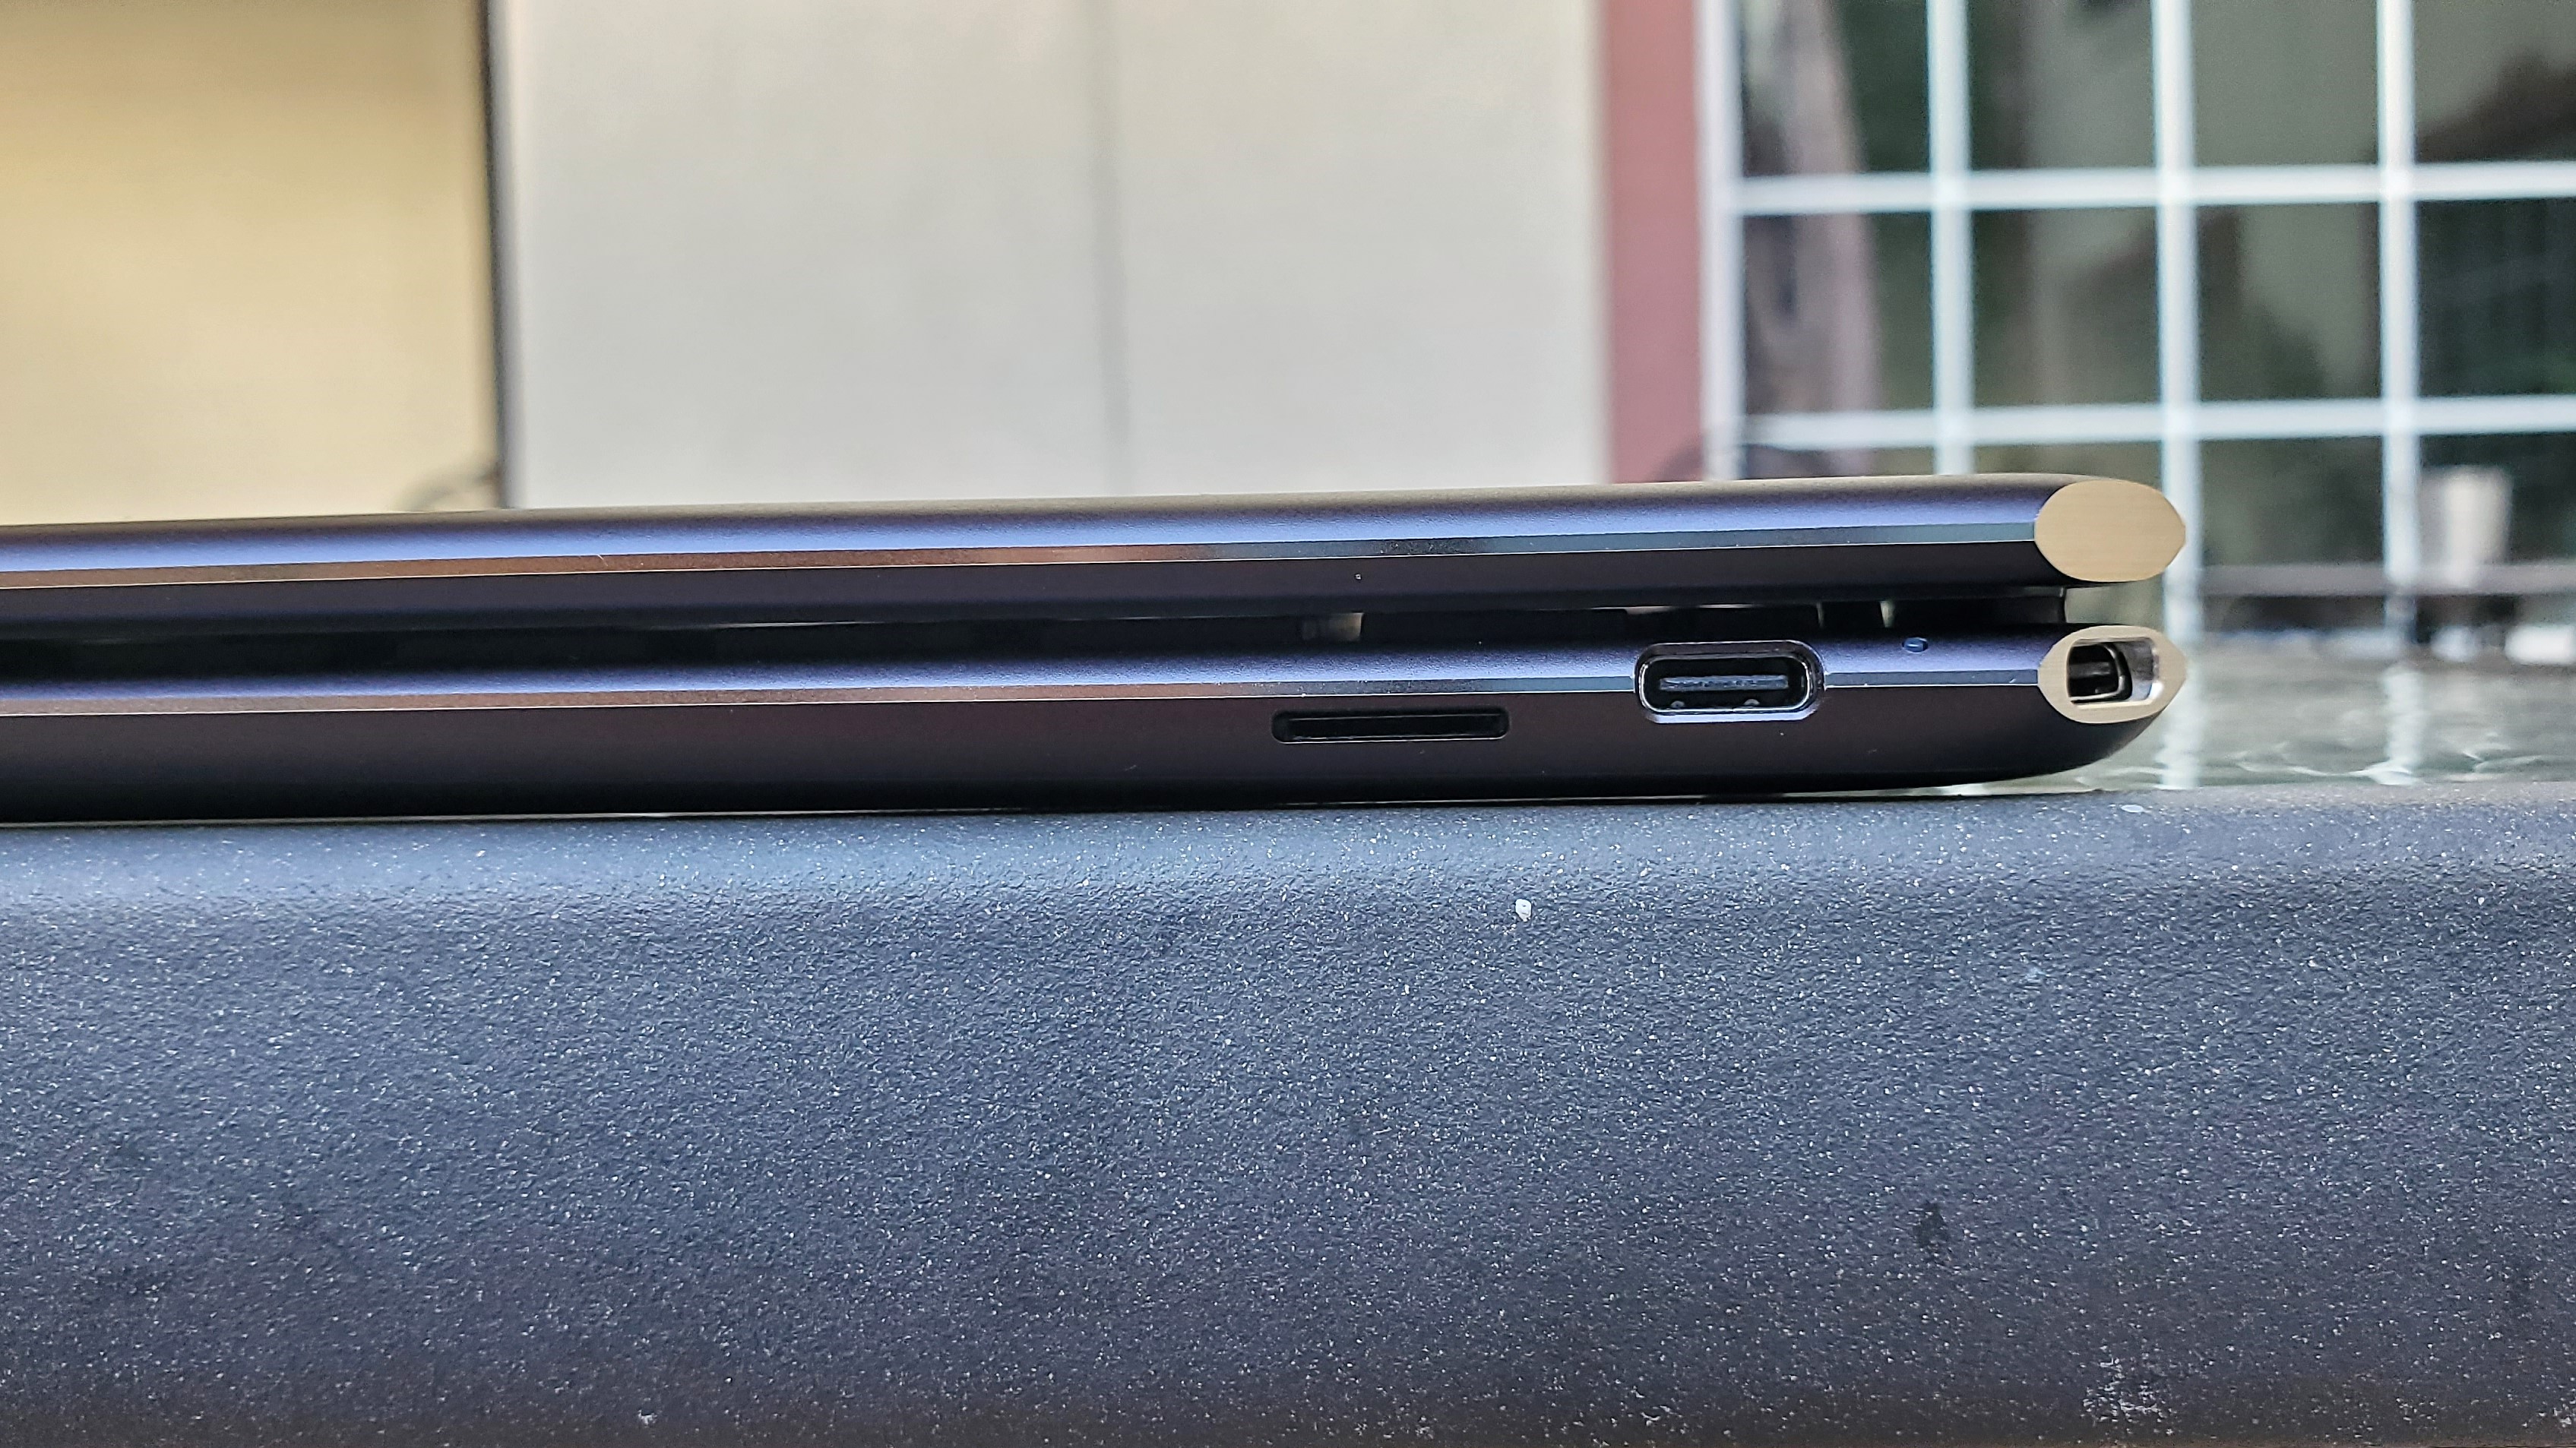 HP Spectre x360 13.5 (2022) Review